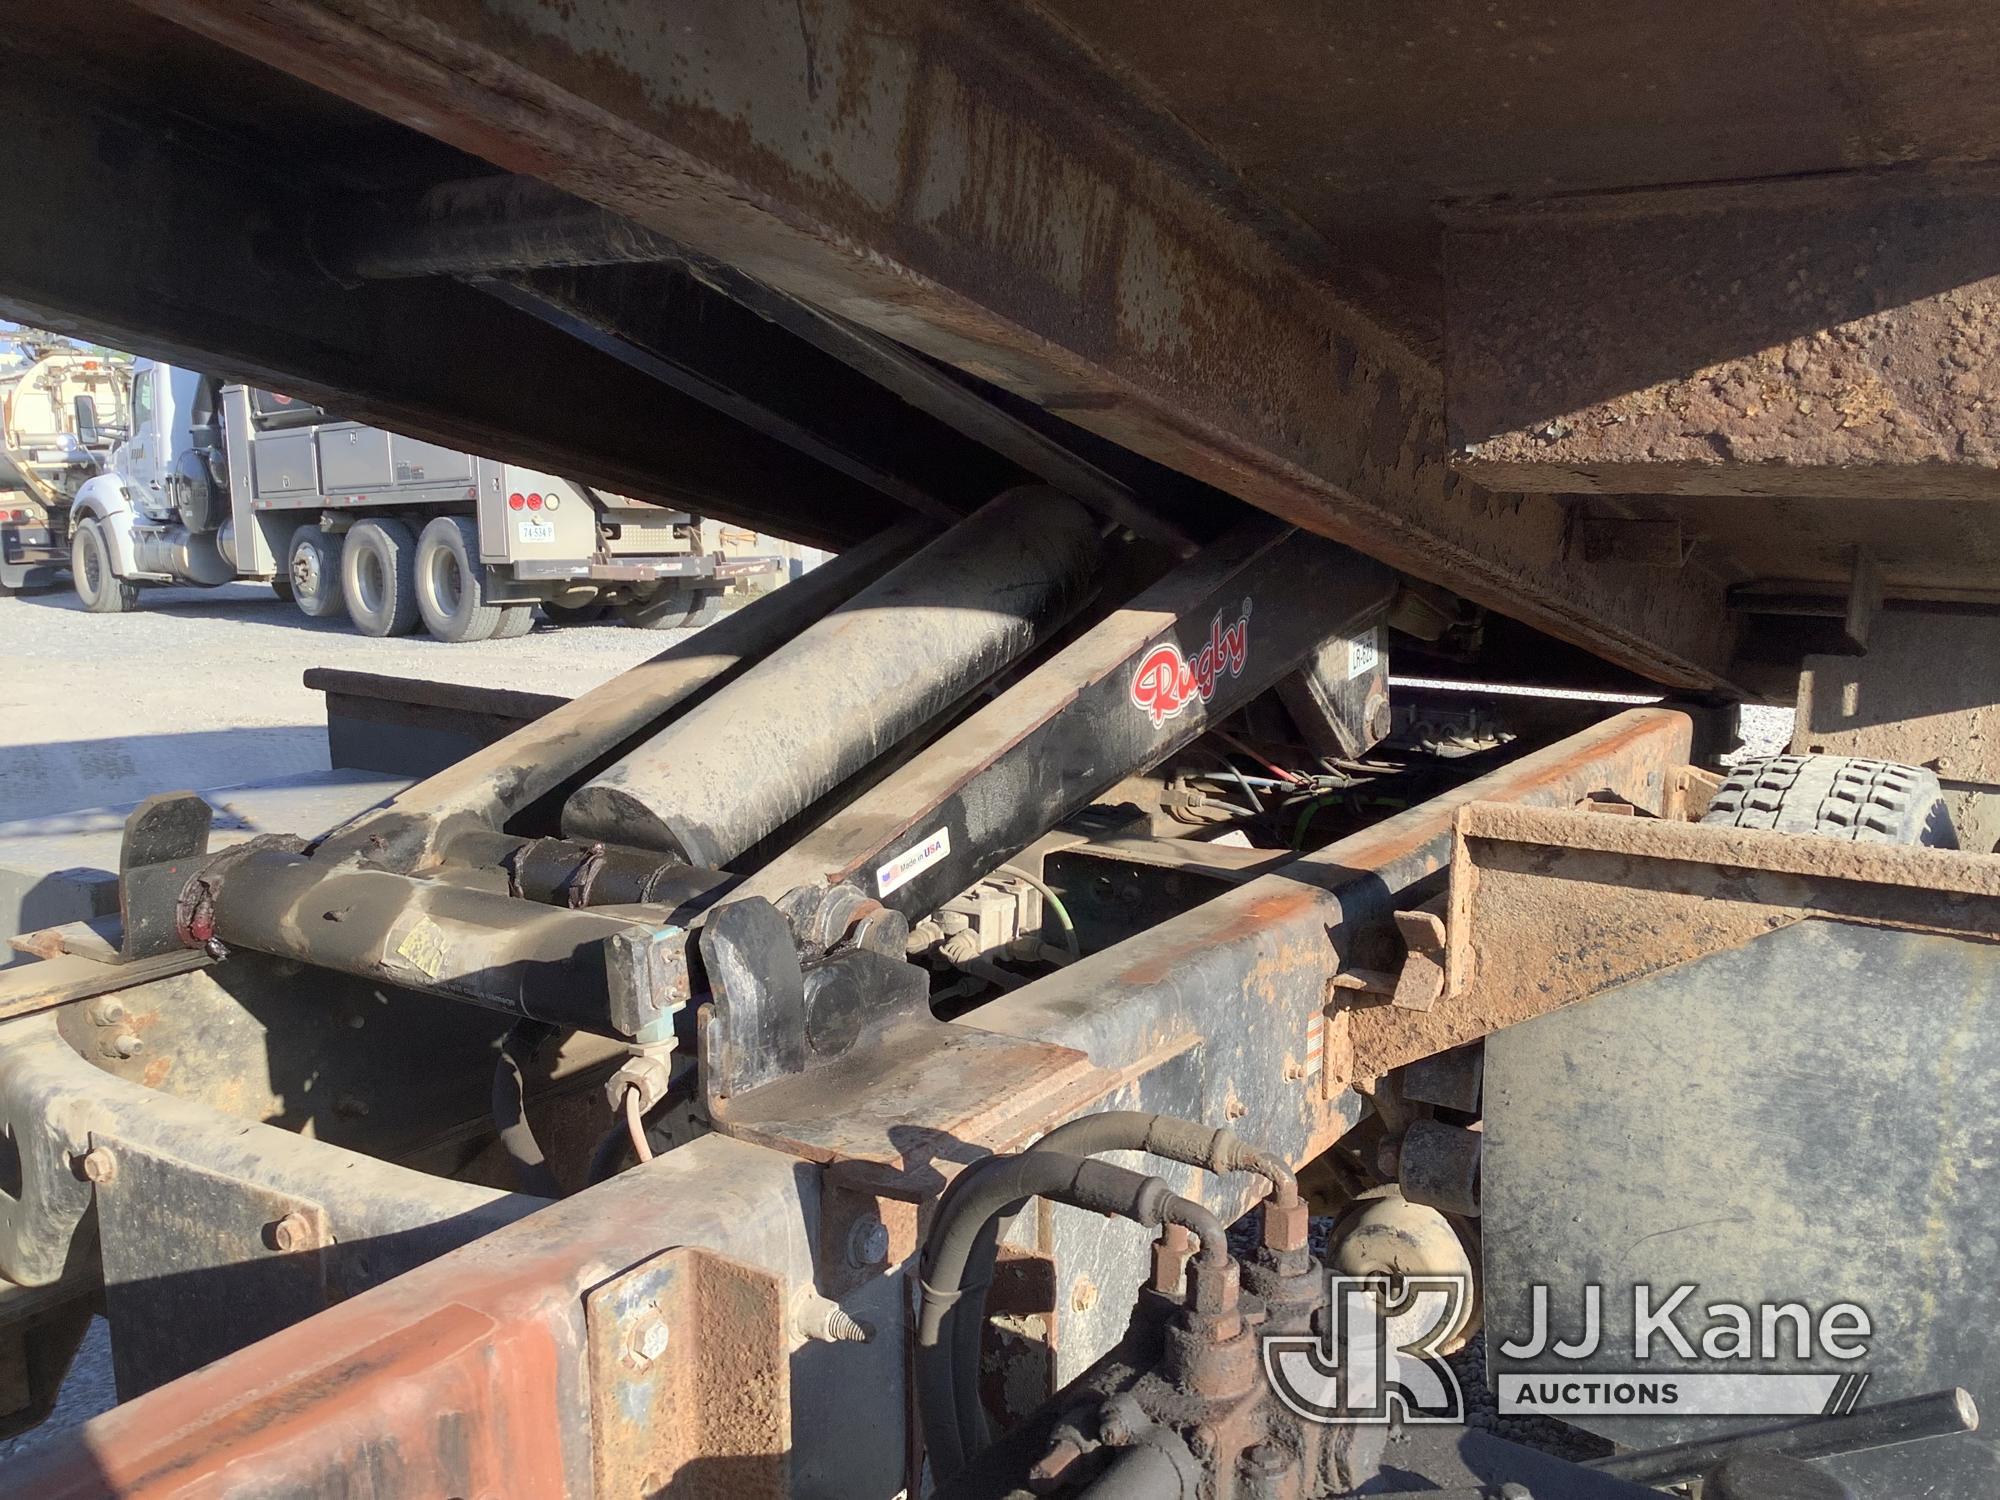 (Houston, PA) 2013 Ford F750 Dump Truck Runs, Moves & Operates) (Check Engine Light On, Rust & Body